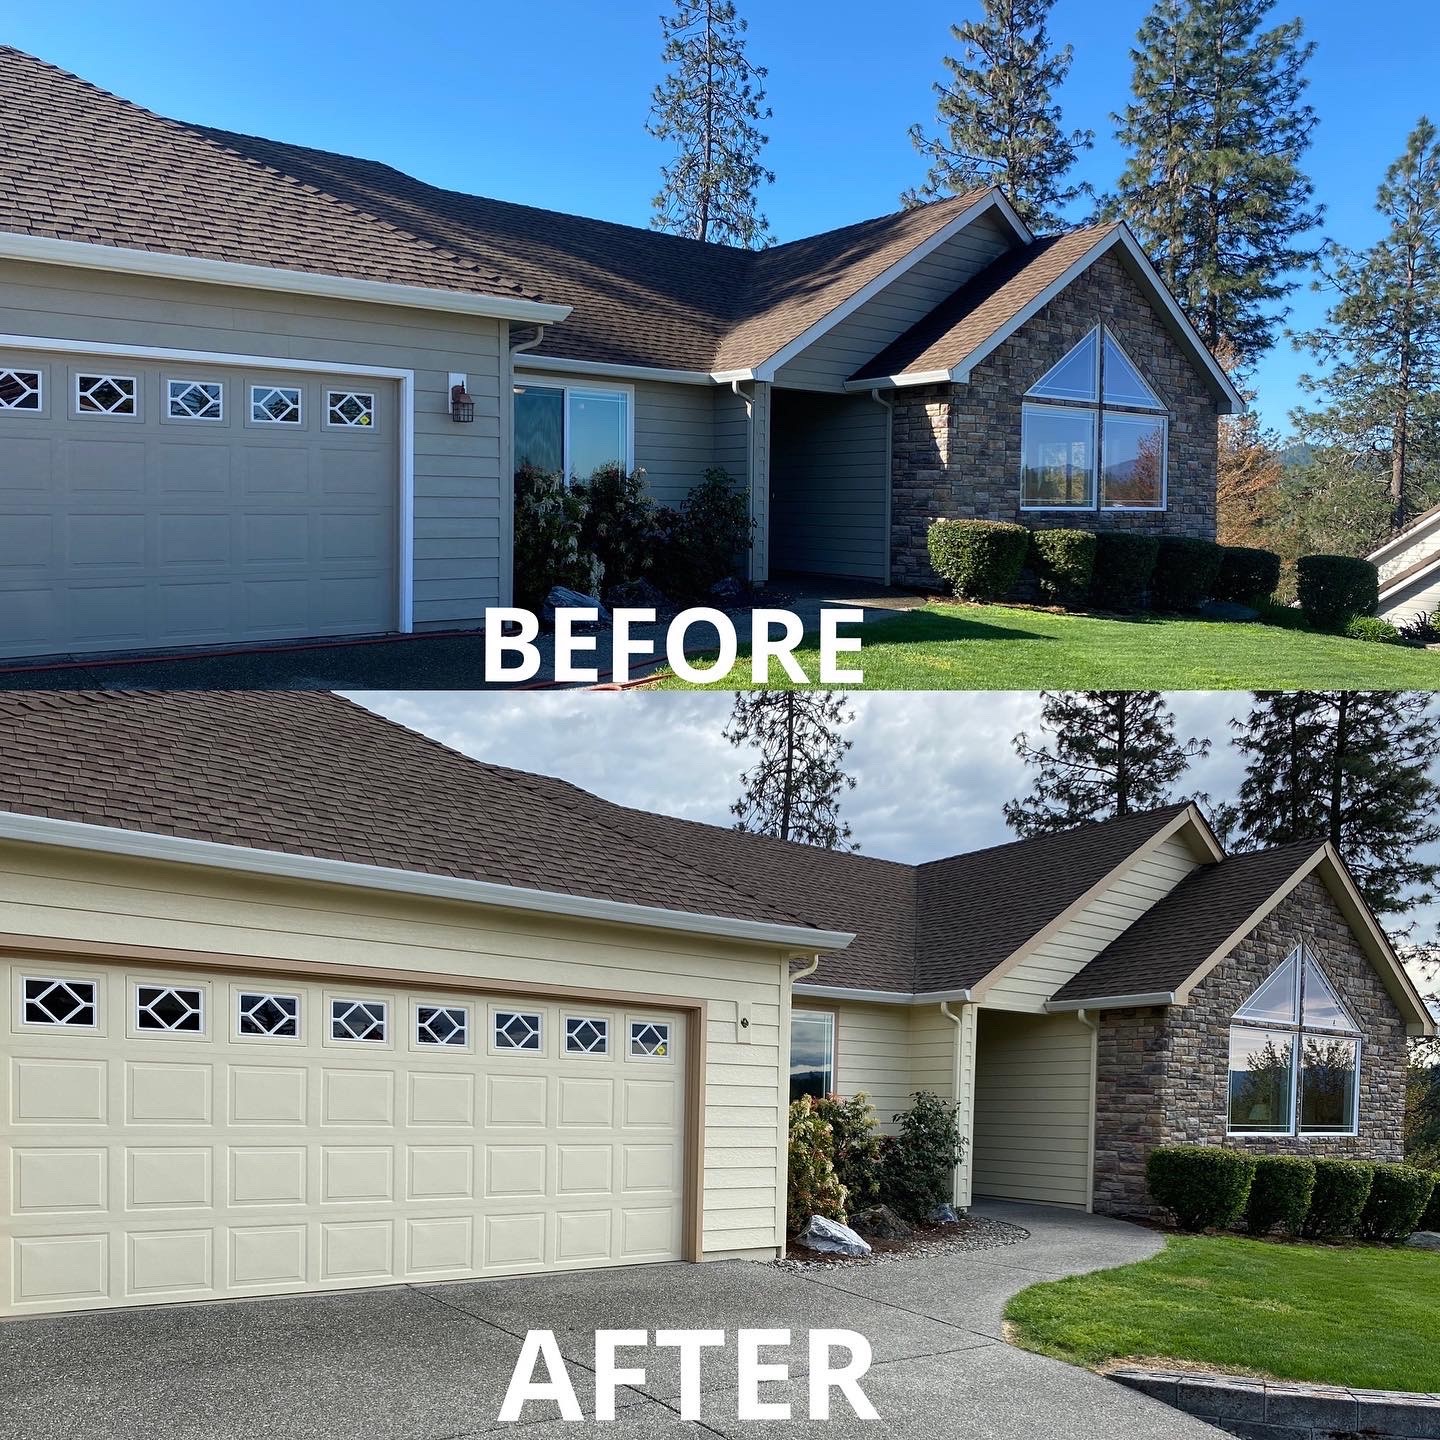 Before and After exterior of home in Grants Pass, Oregon 97527